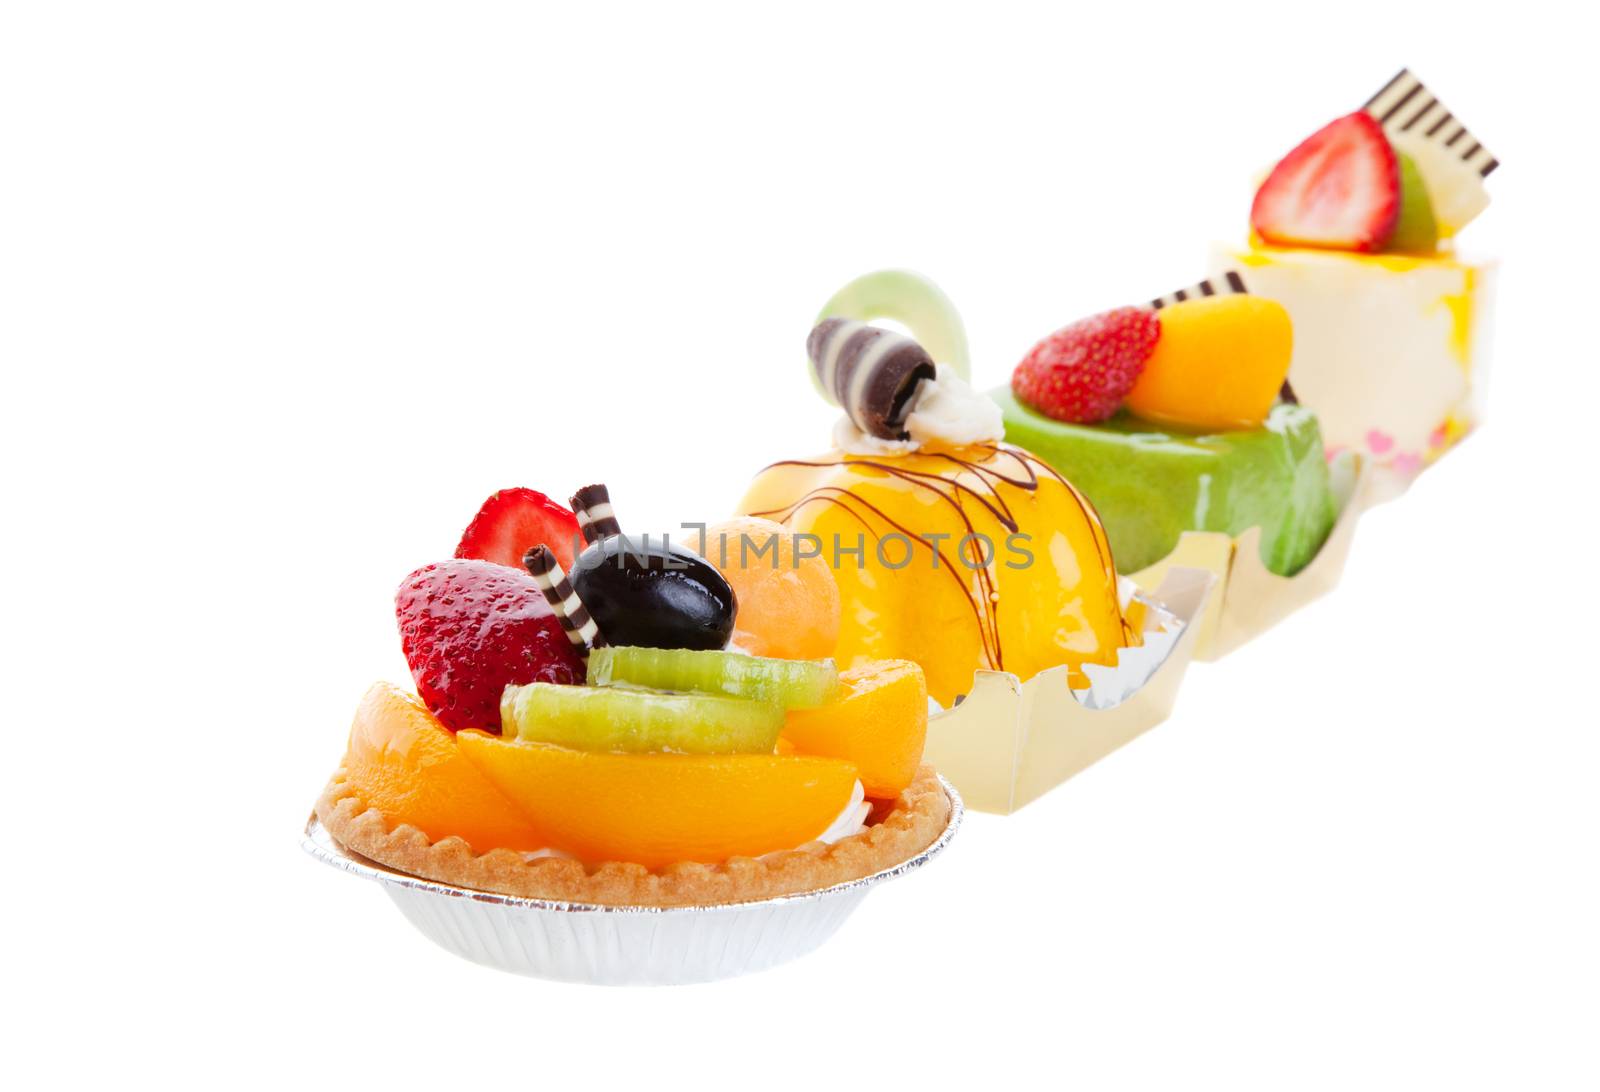 An assortment of Asian desserts, featuring (from left to right) Fruit Tart, Mango Mousse, Green Tea Cake, & Mousse Cake.  Shot on white background.